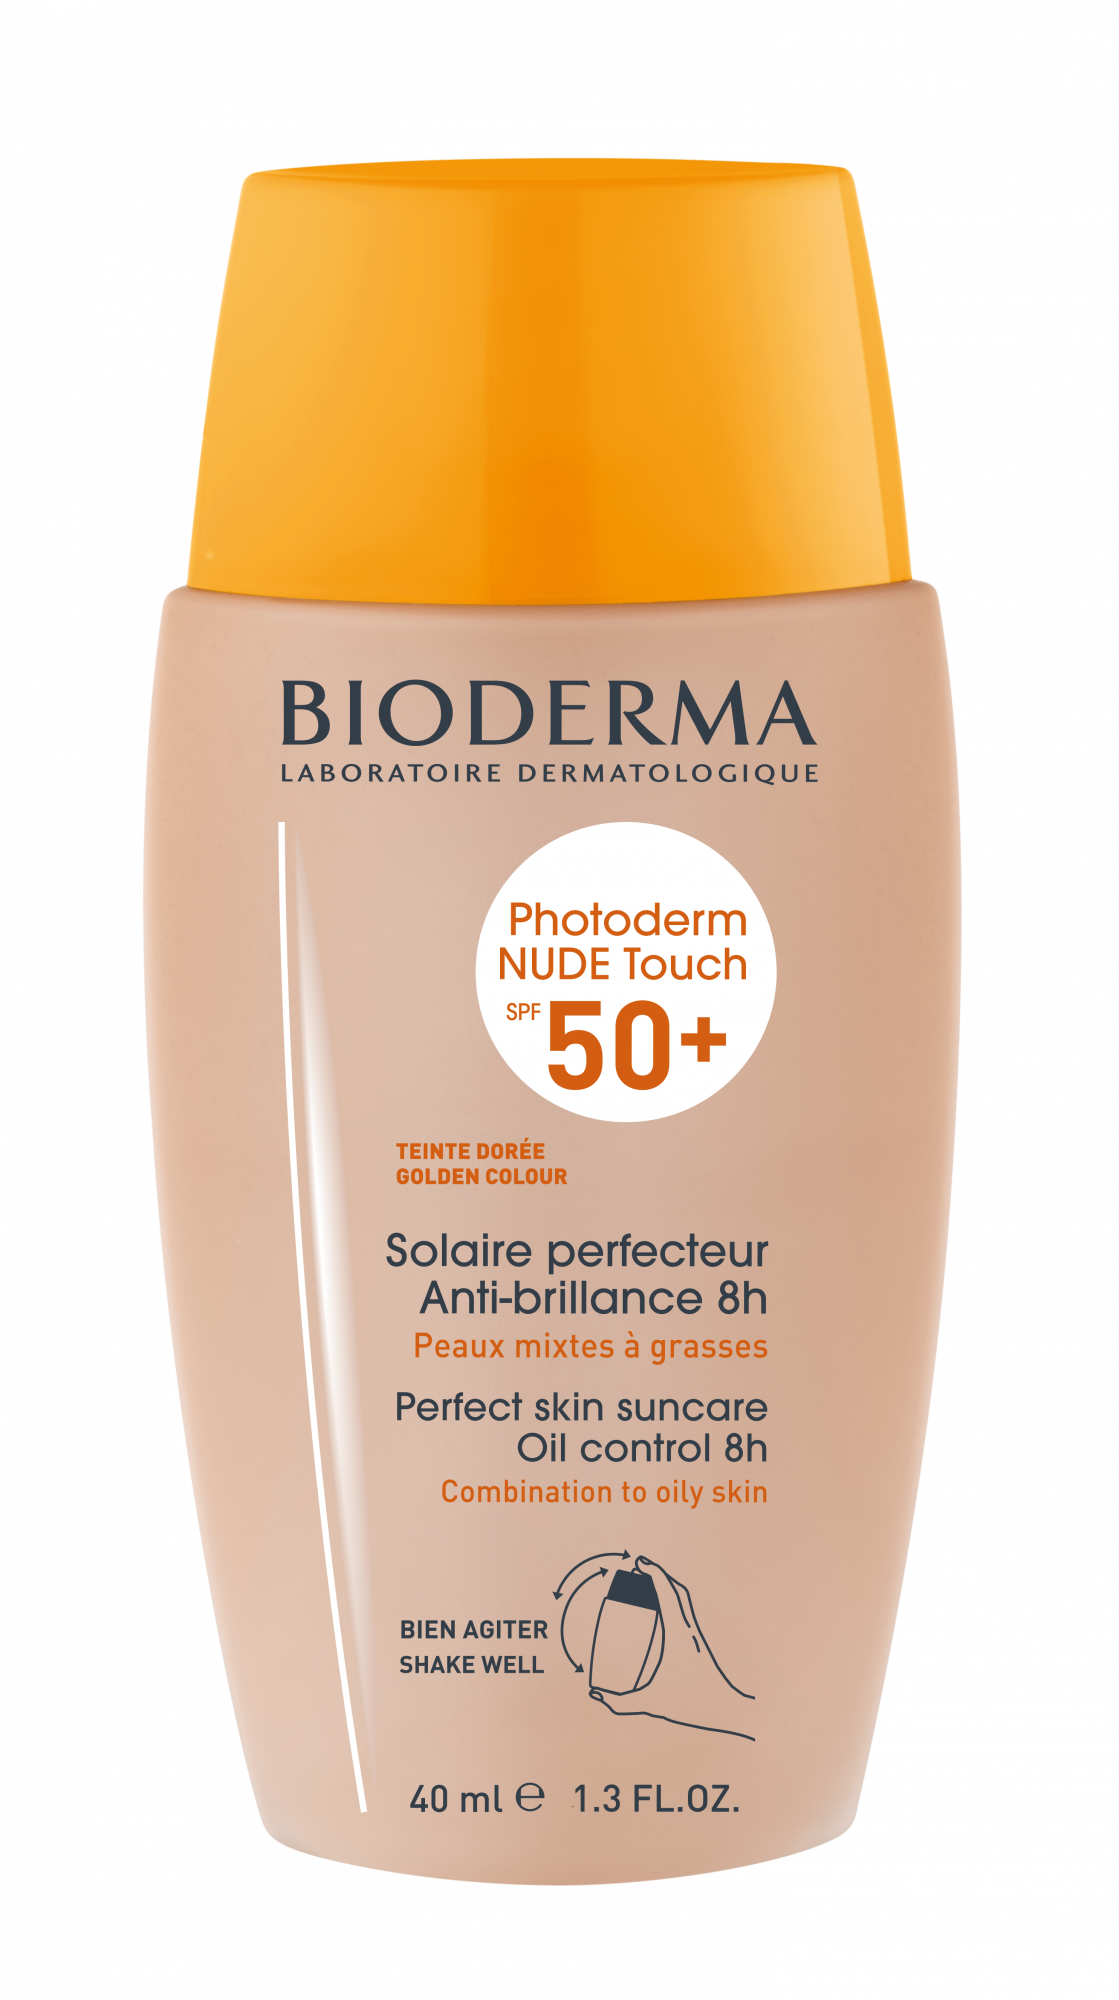 Photoderm Nude Touch Color FPS50 Bioderma